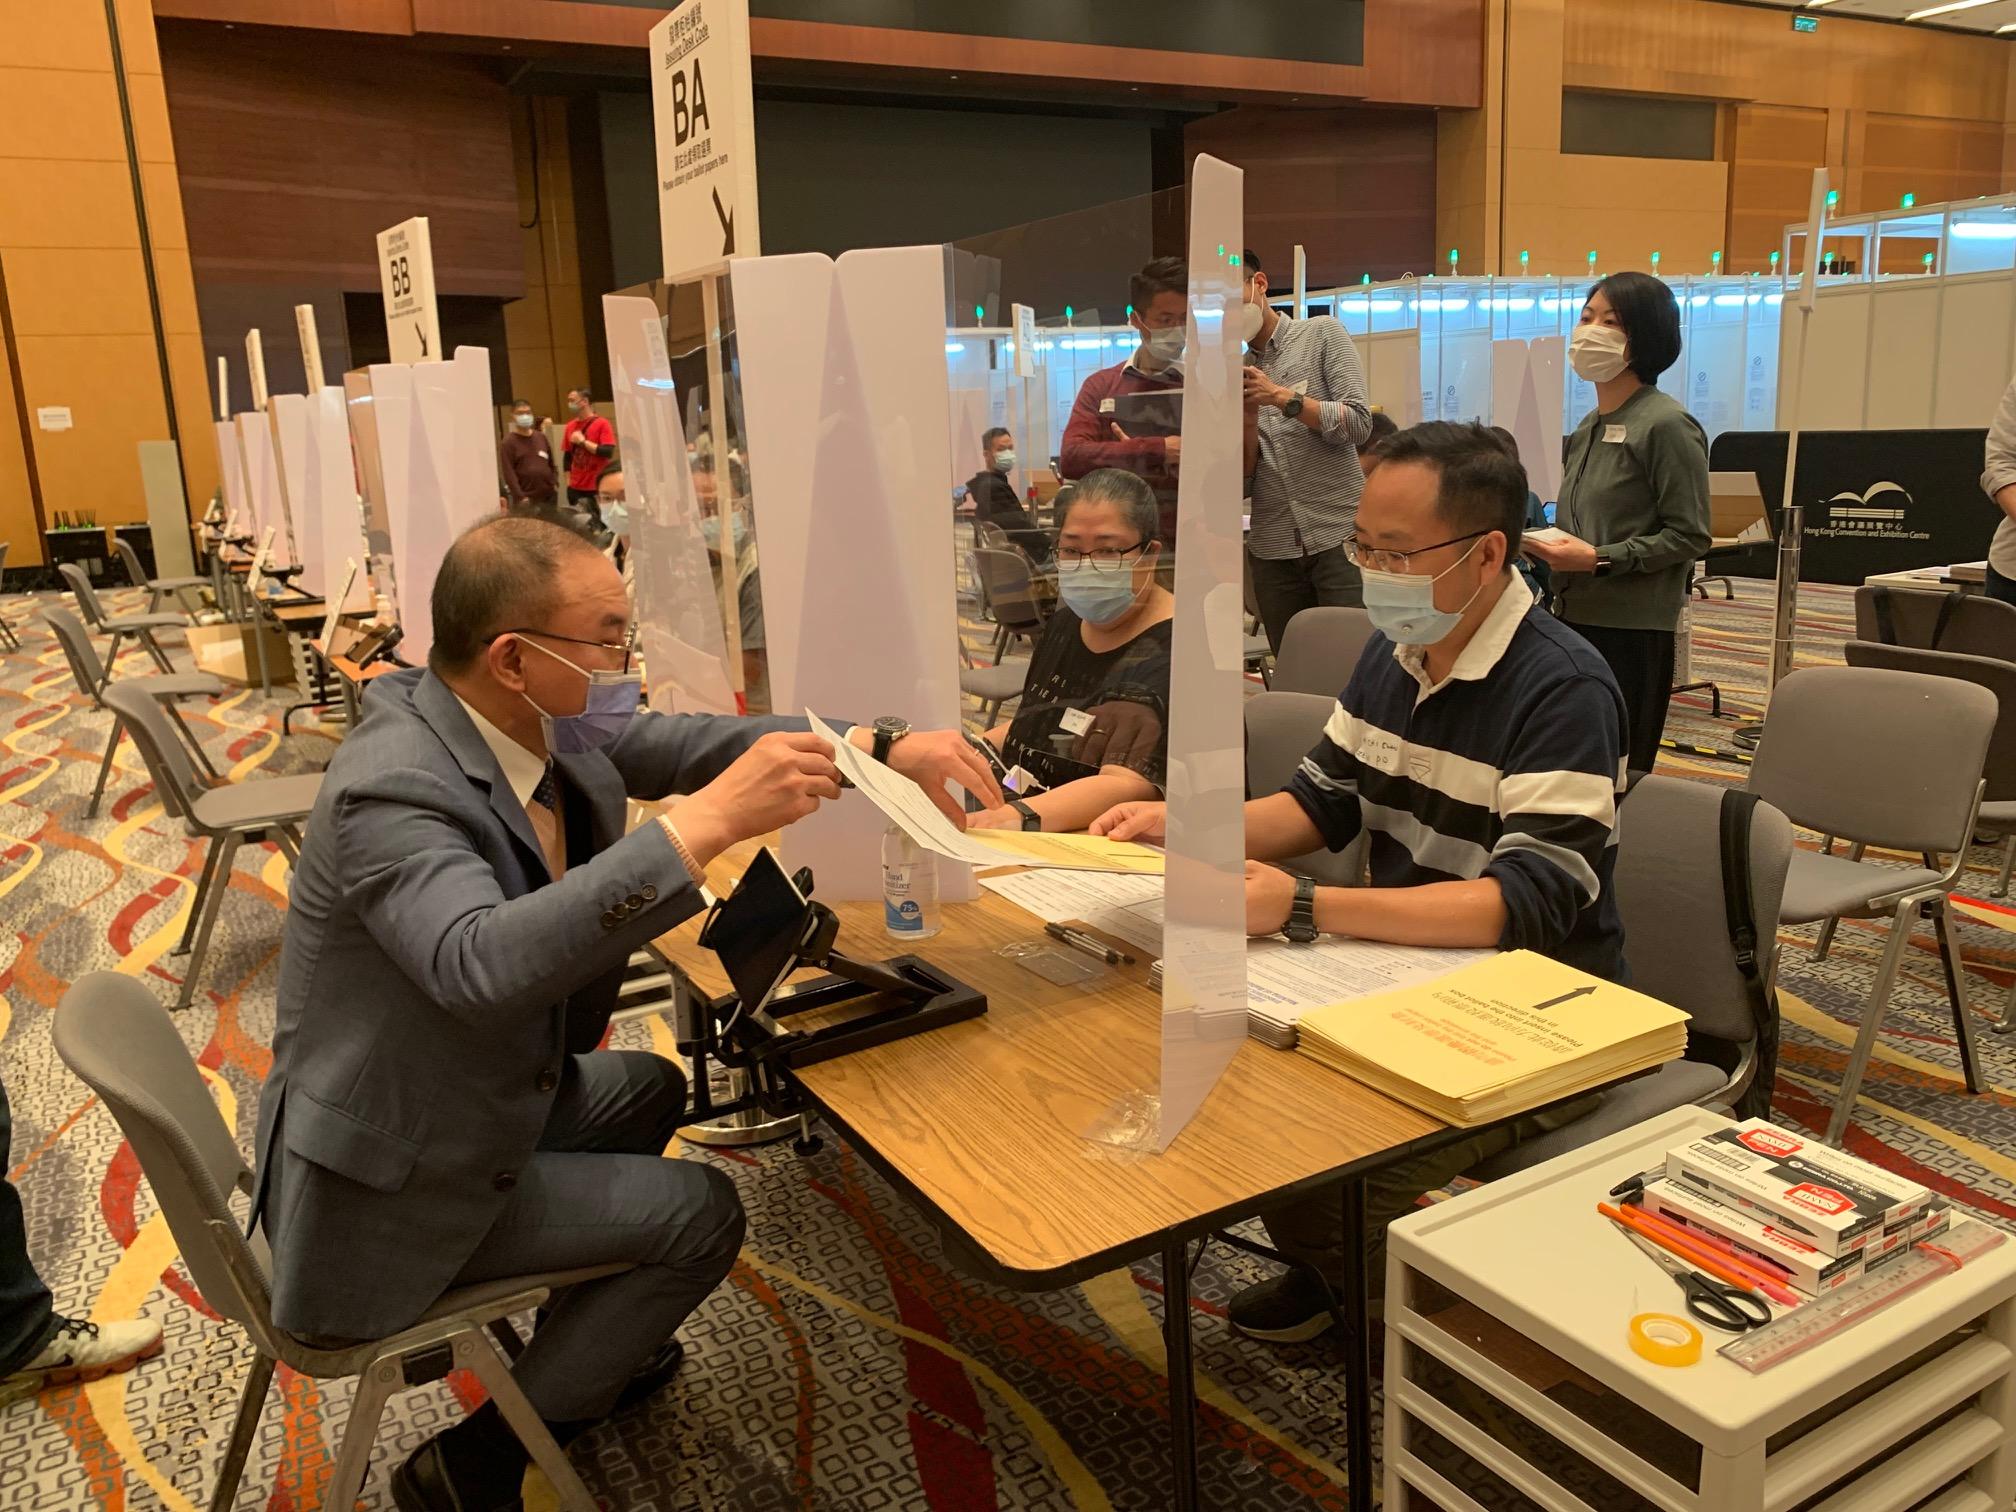 The Secretary for Constitutional and Mainland Affairs, Mr Erick Tsang Kwok-wai, today (December 18) visited the central counting station and Election Committee constituency (ECC) polling station at the Hong Kong Convention and Exhibition Centre. Photo shows Mr Tsang (left) being briefed by electoral staff on the operation of ballot paper issuing desks at the ECC polling station.